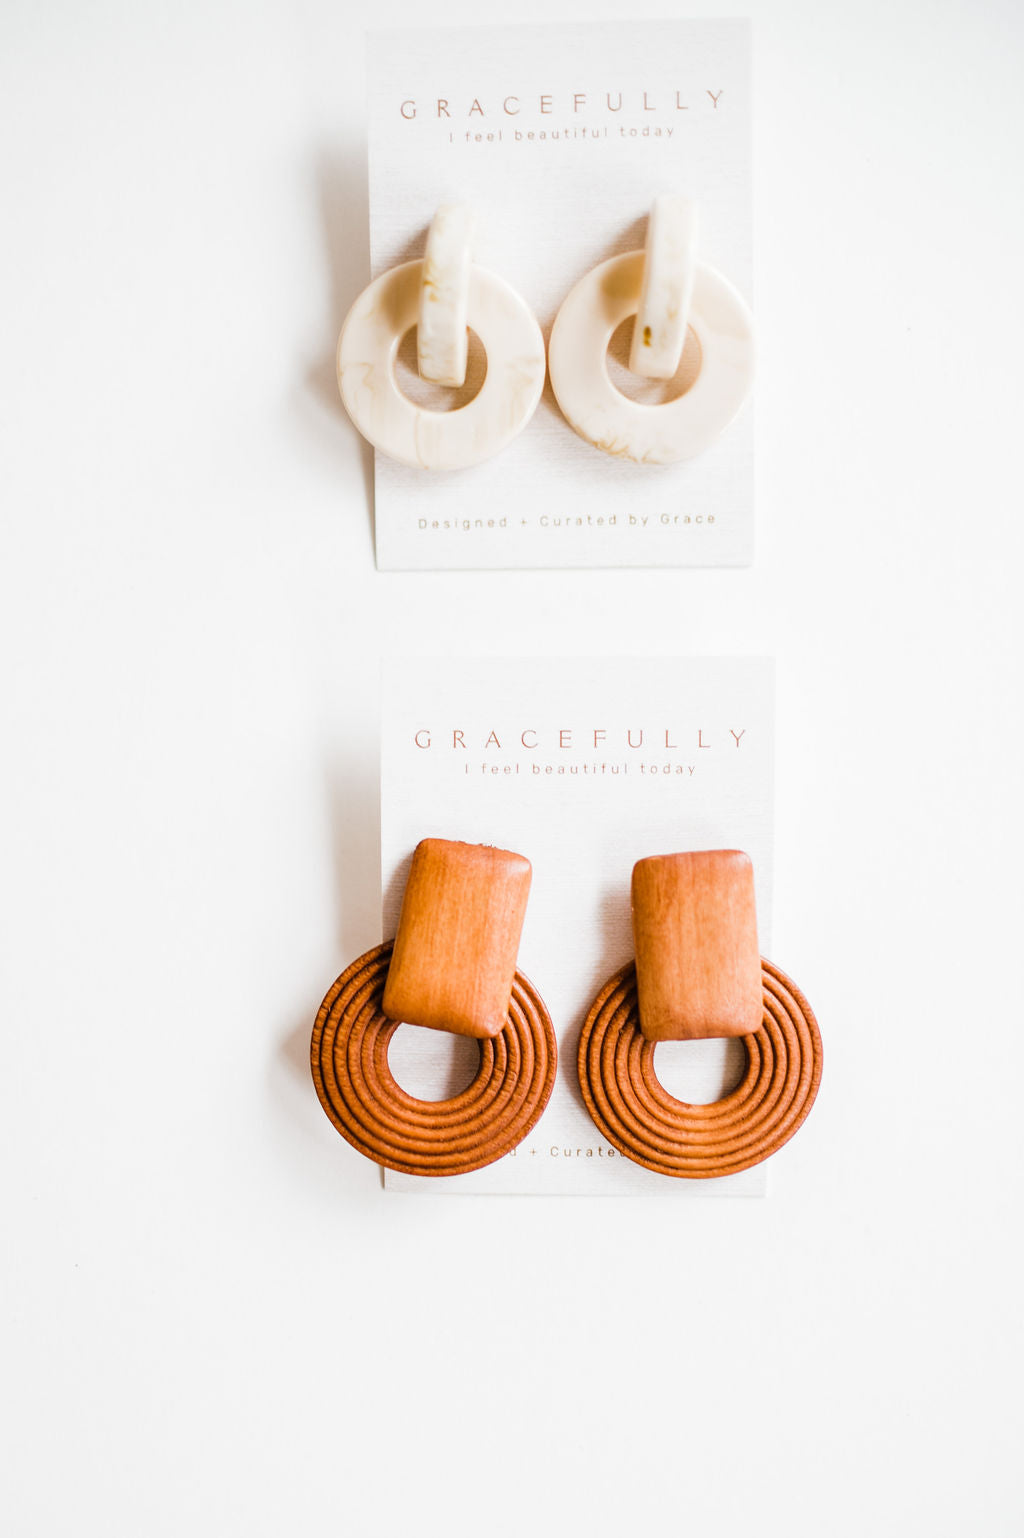 Warm wood colored earrings made out of wood. Handmade in Texas and lightweight with dimensions of 5.5cm by 3.9cm. Eye catching neutral colored earrings that will have everyone asking you where you got them! Ramble & Co. is a family owned business. Shop at shop.rambleandcompany.com or visit our store in Wichita Falls, Texas || small batch/ hand printed tees + fine art prints | your source of encouragement + inspiration.